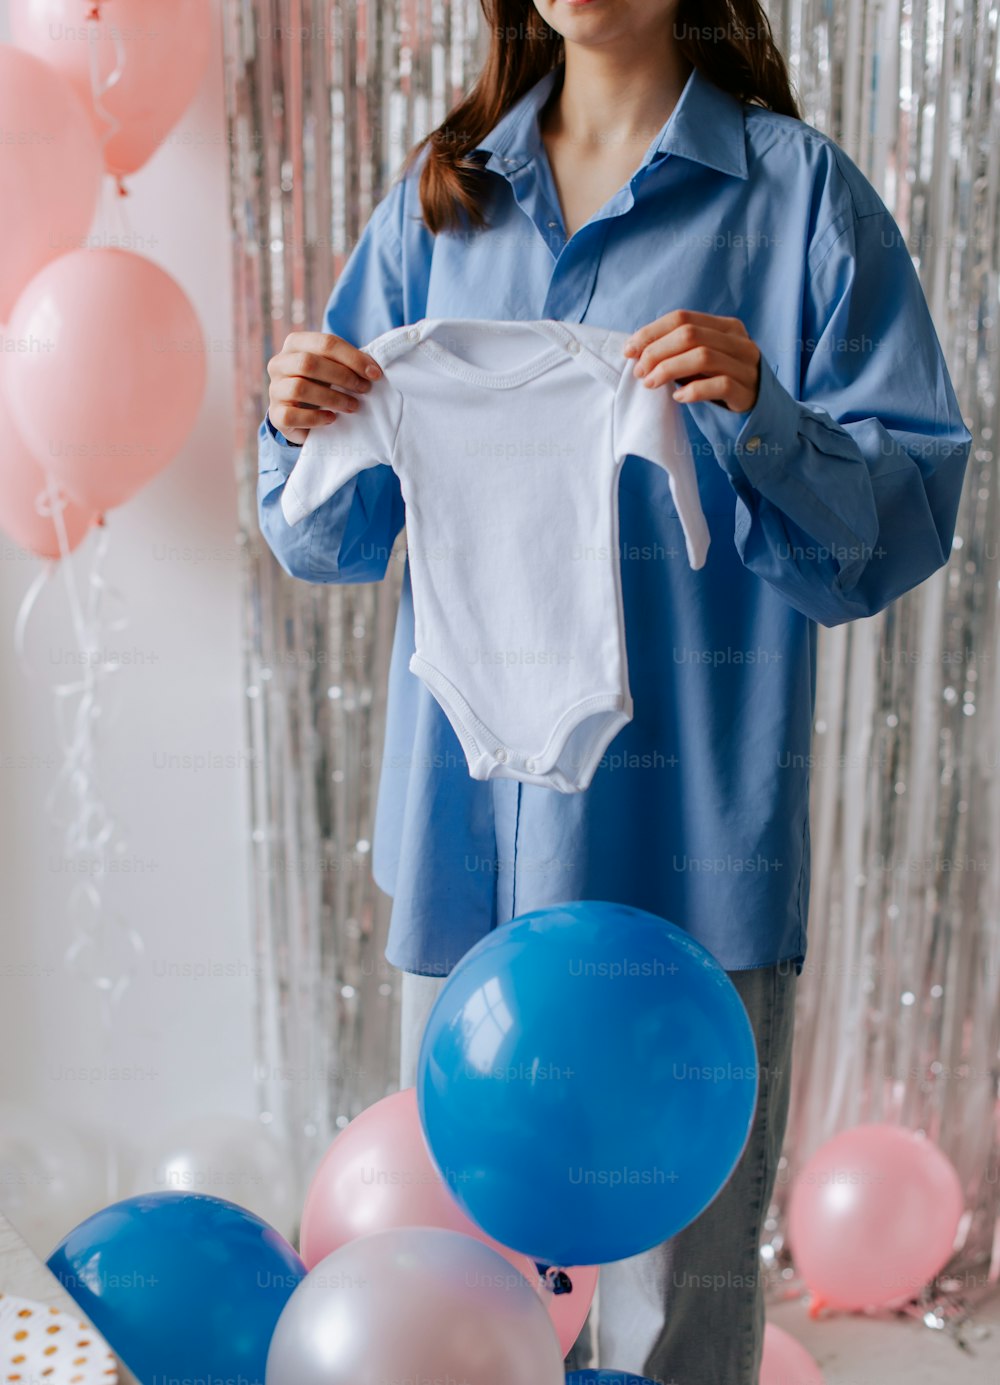 a woman holding a white shirt over a bunch of balloons